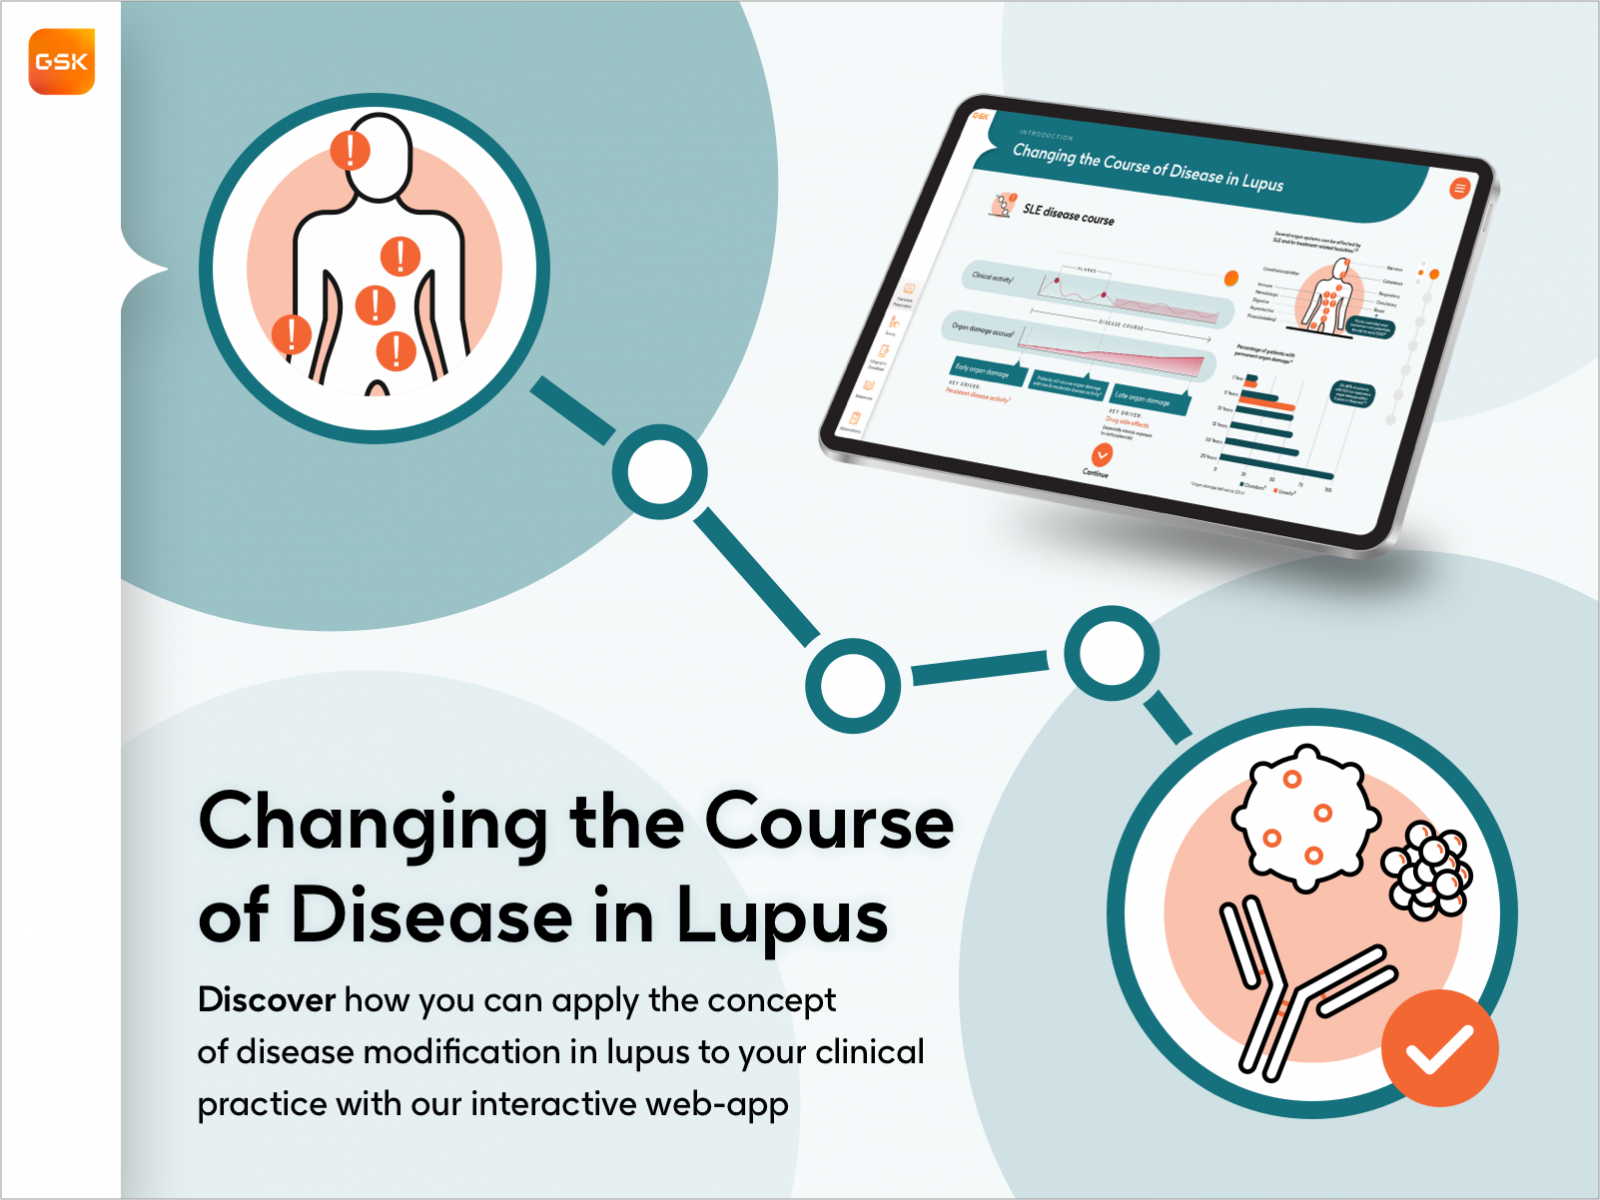 Changing the Course of the Disease in Lupus Case Study